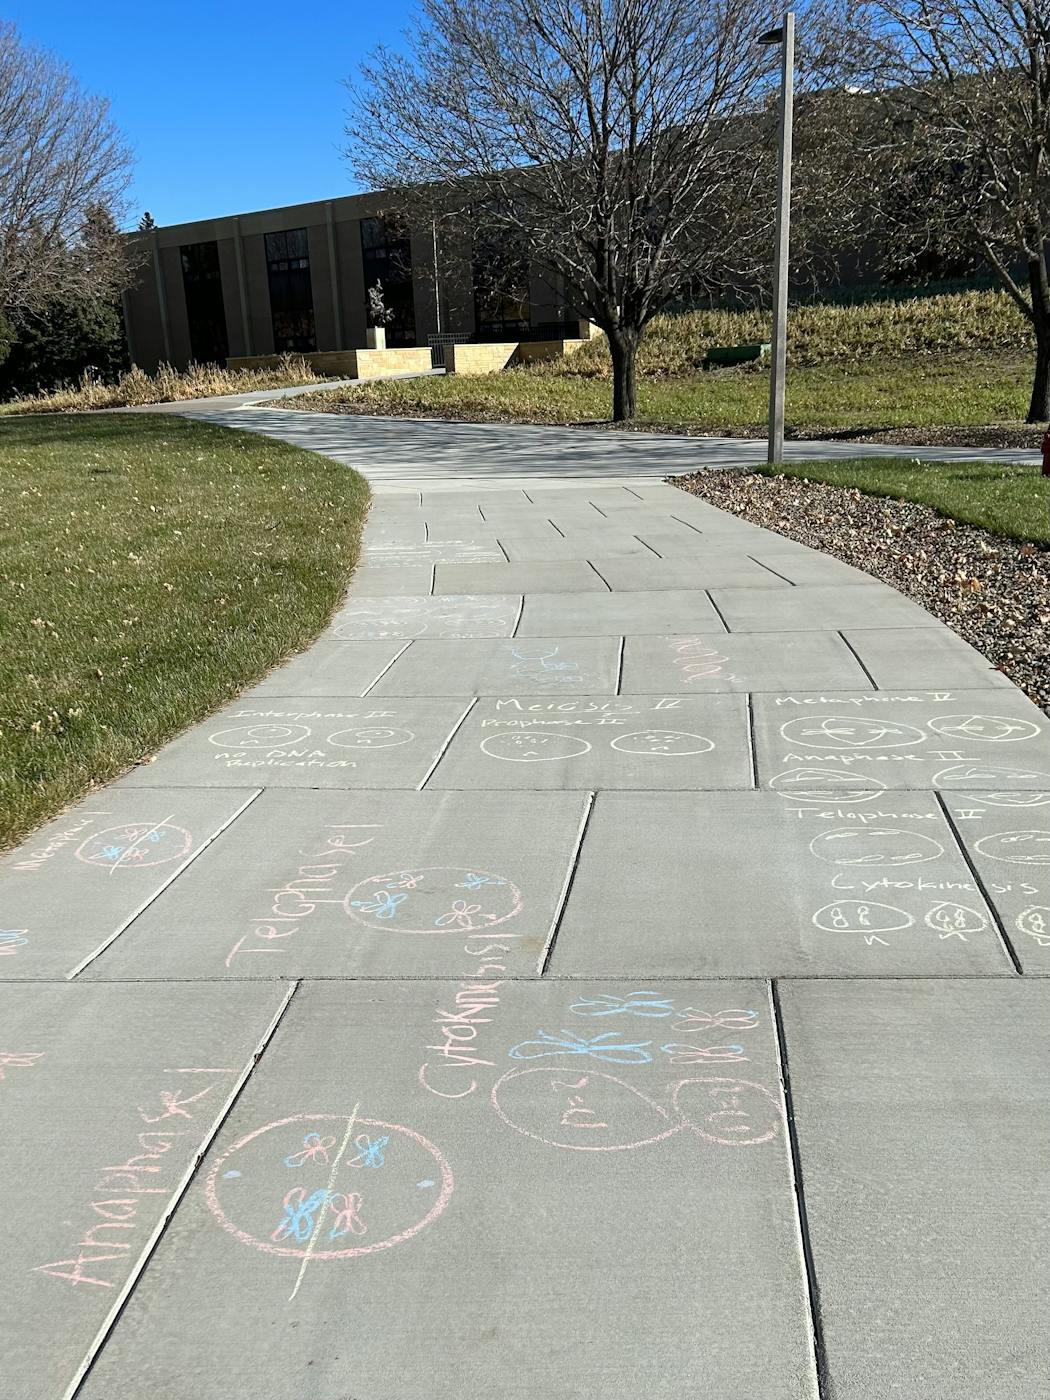 Biology students at Gustavus Adolphus College worked outside on an unusually warm day last week, leaving equations and formulas in chalk on a sidewalk.